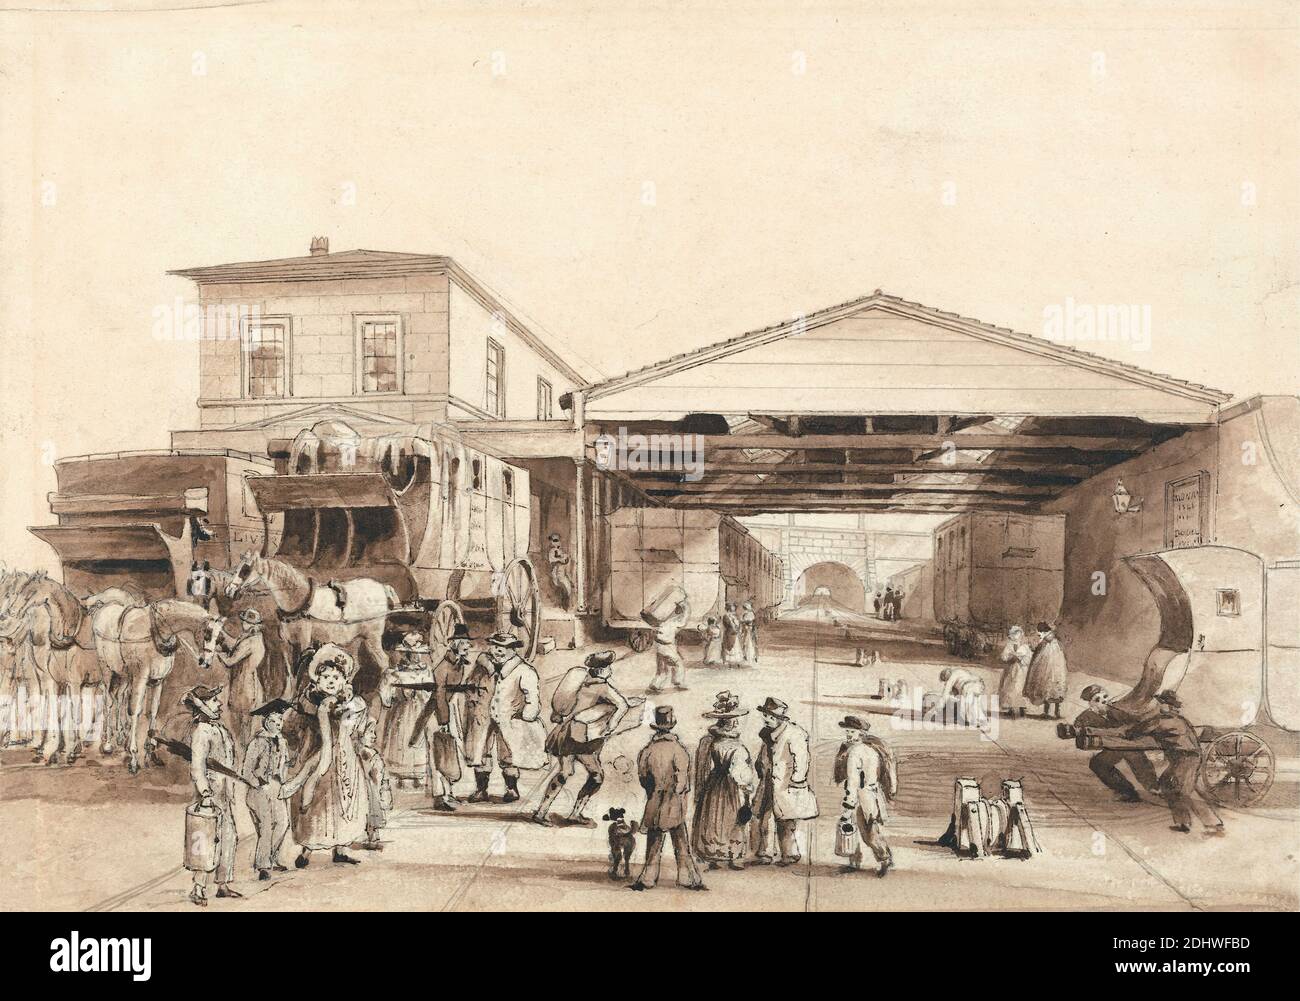 Railway Office, Liverpool, Isaac Shaw, active 1830, ca. 1830, Brown wash, brown ink, and graphite on medium, slightly textured, cream wove paper, Sheet: 6 1/16 × 8 5/8 inches (15.4 × 21.9 cm), architectural subject, cityscape, coaches (carriages), dog (animal), genre subject, horses (animals), luggage, railway, railway cars, railway yard, Railways: offices, travellers, tunnel, railroad, workers, England, Liverpool, United Kingdom Stock Photo